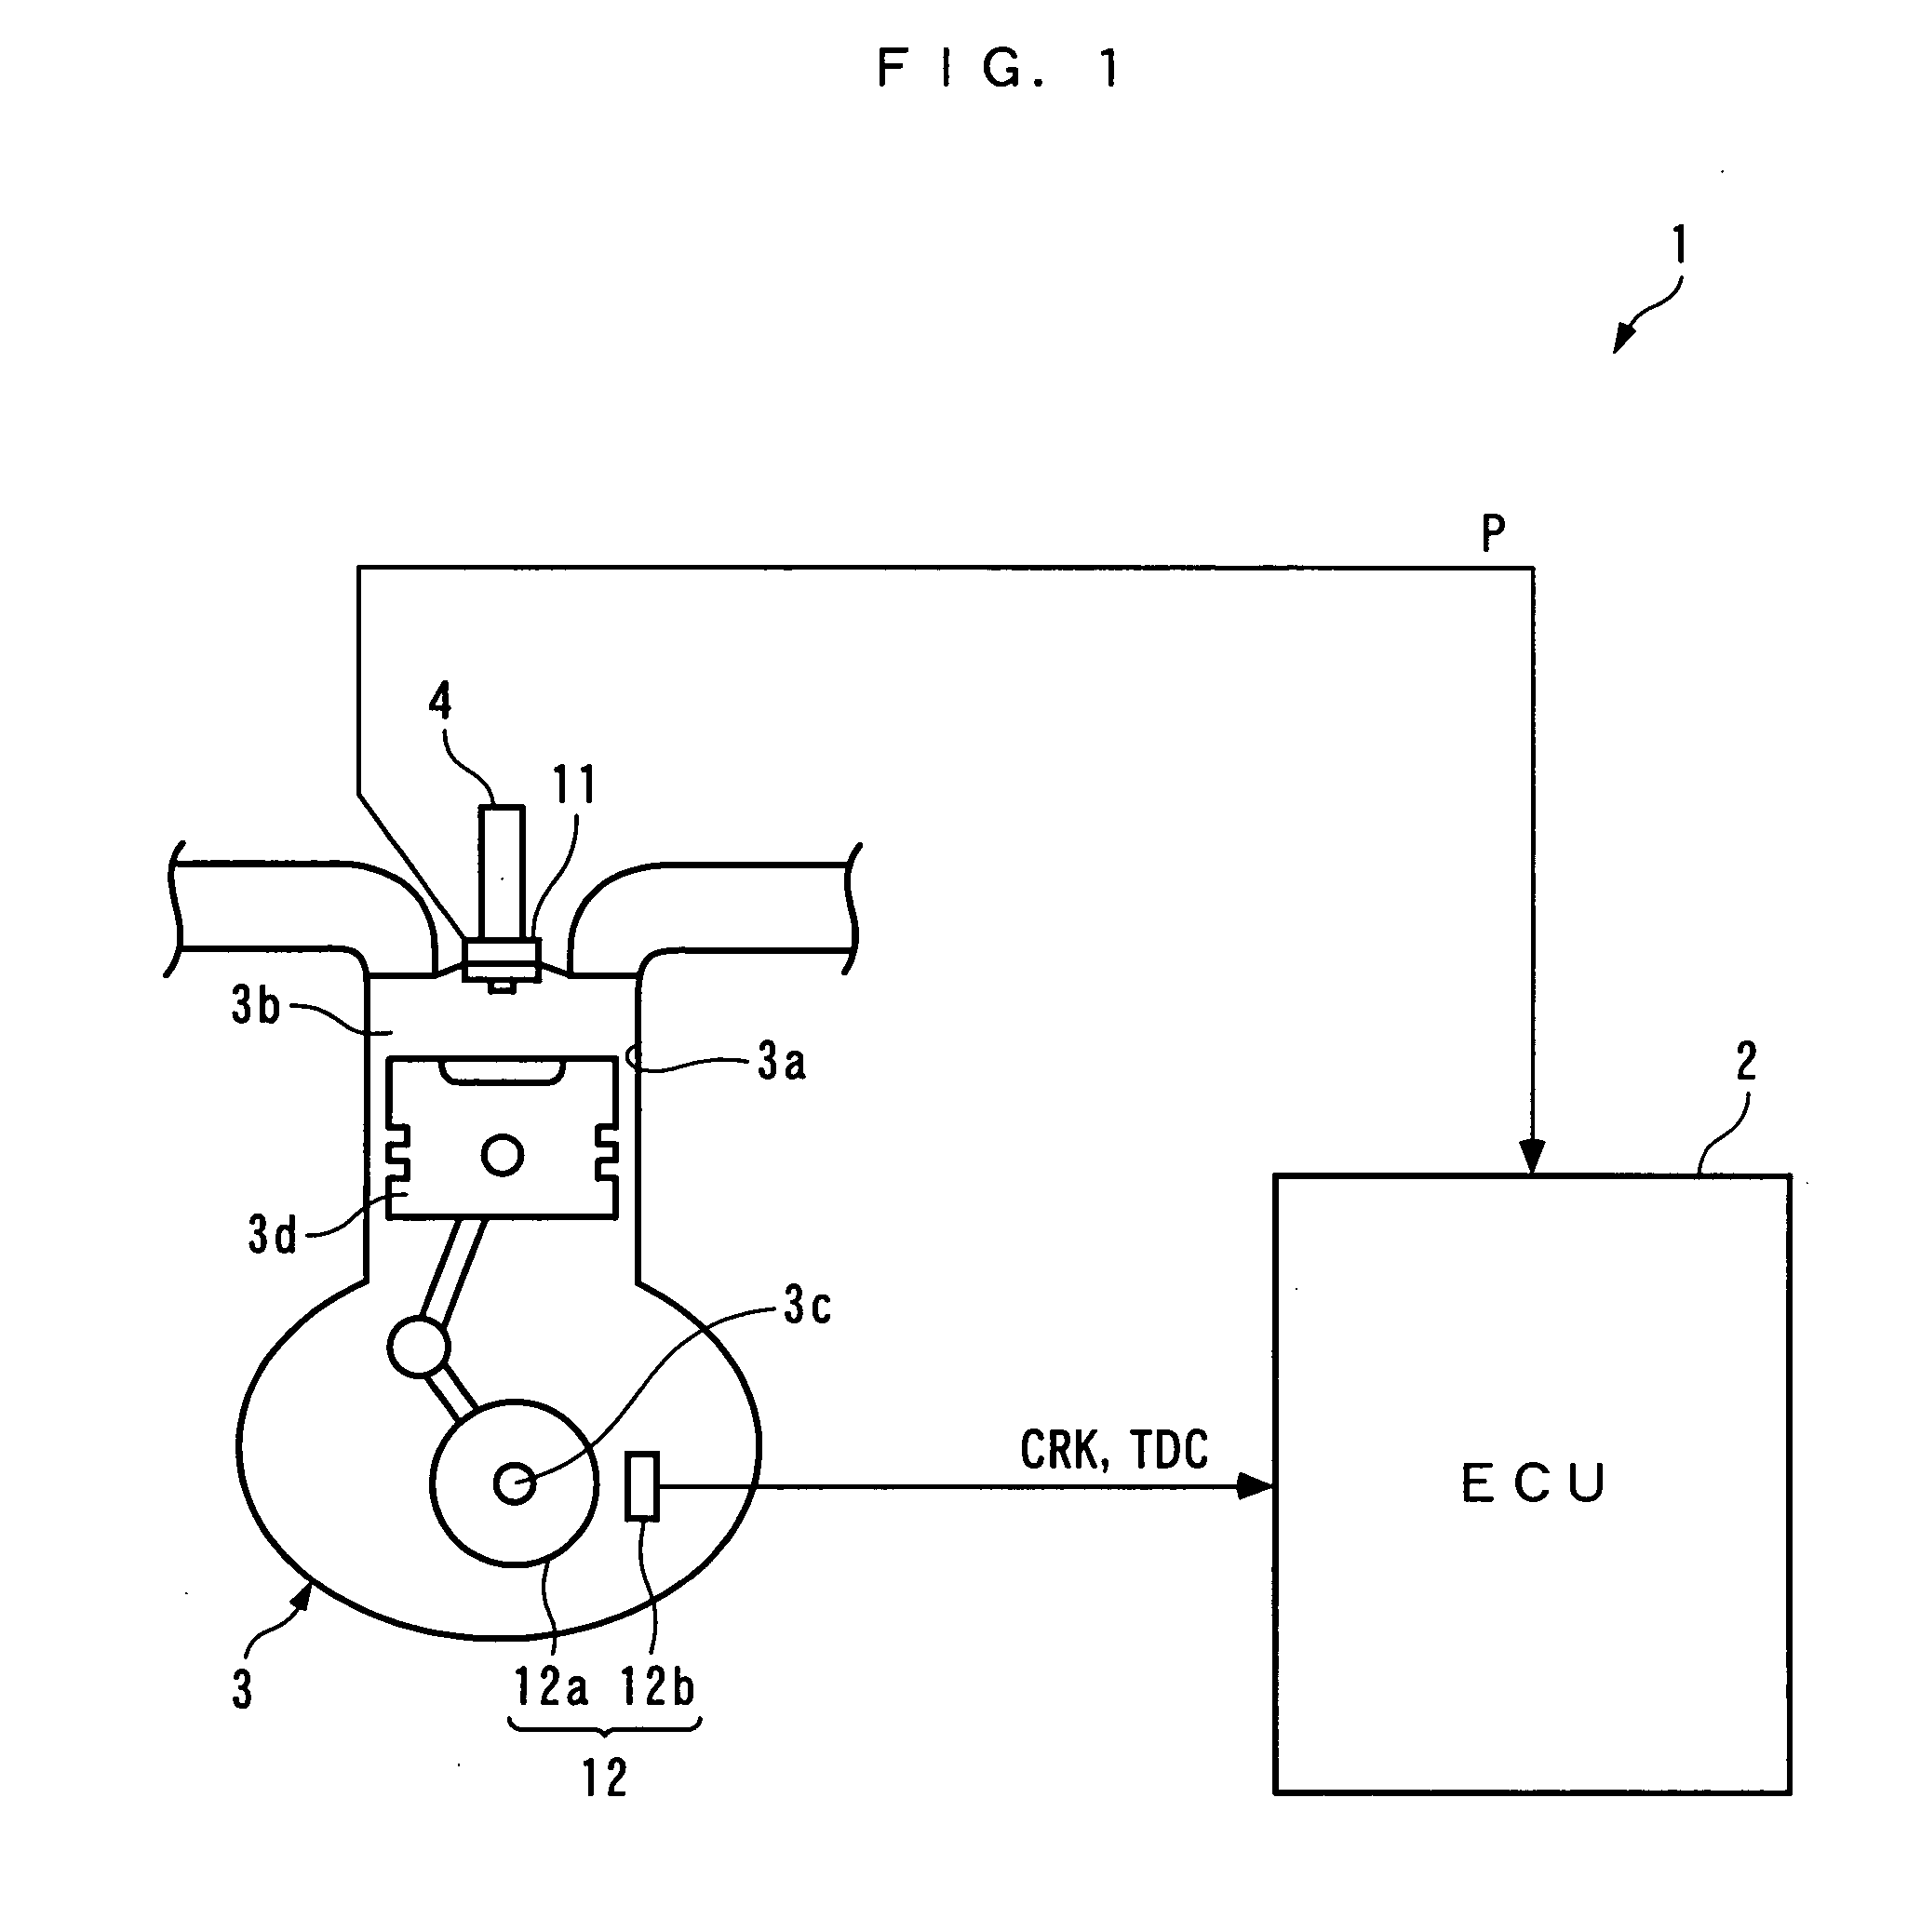 Method of calculating the amount of work done by an internal combustion engine